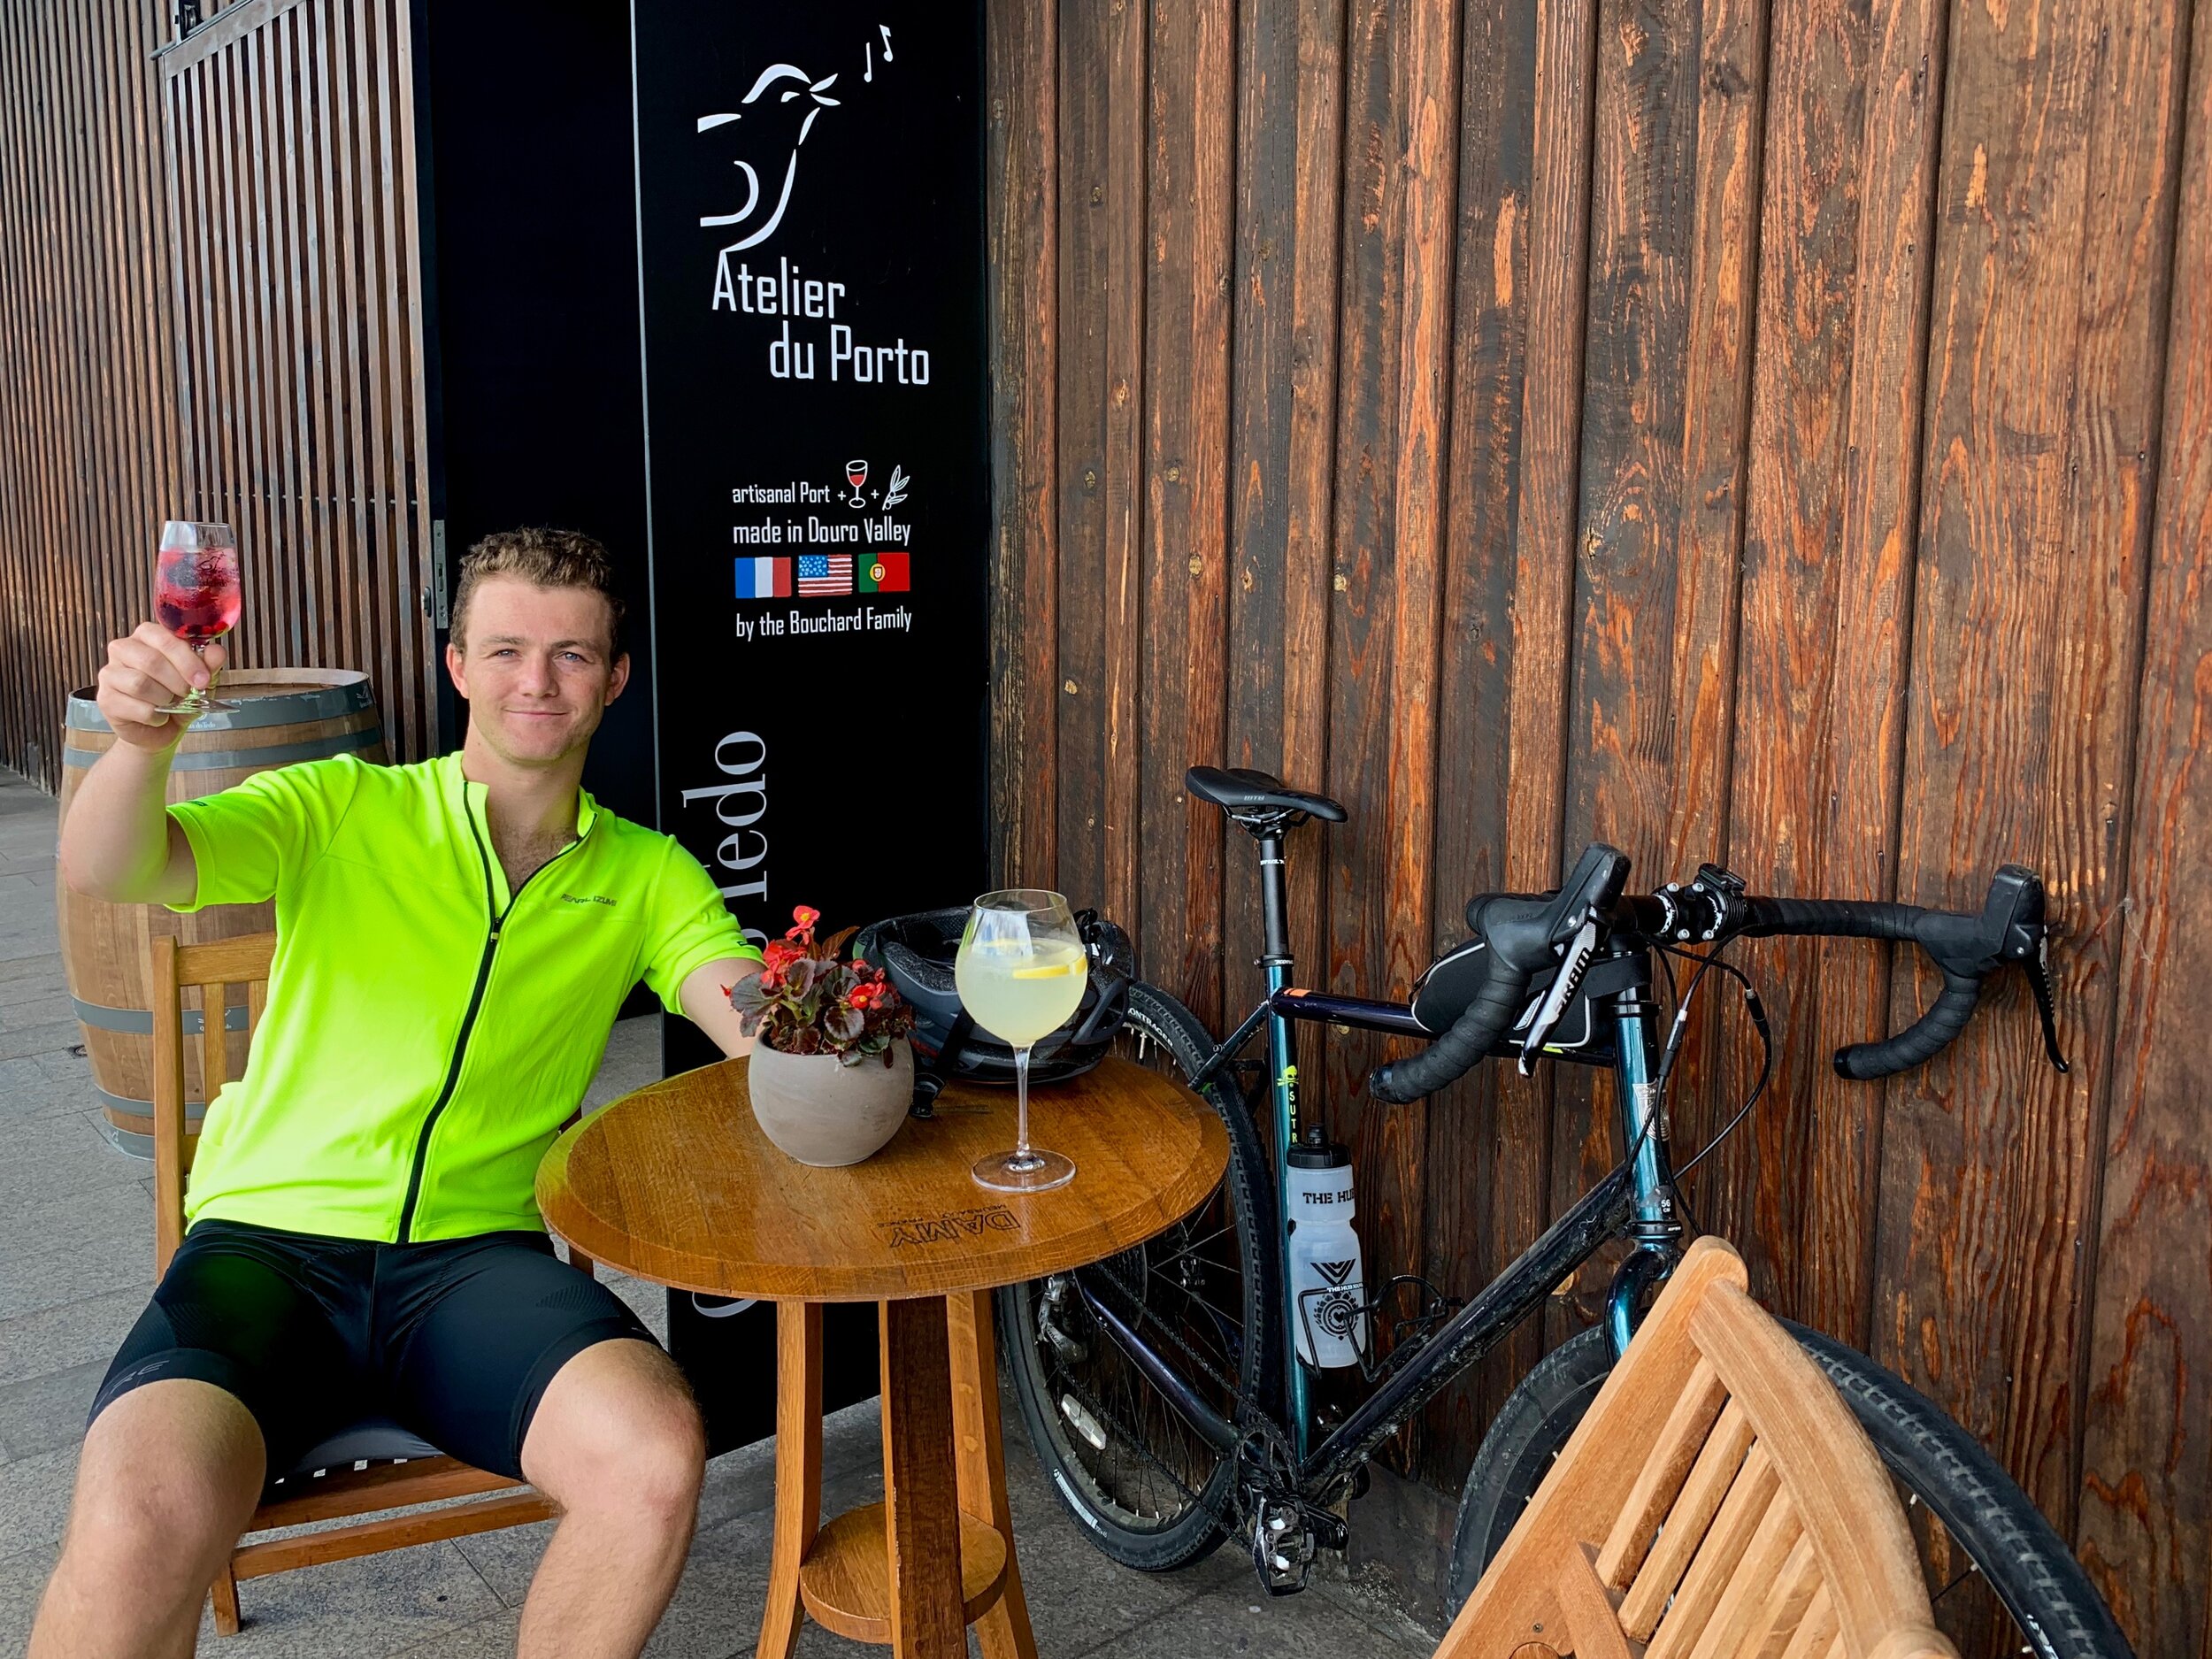 Joseph Bouchard needed a refresher after a 45 km bike ride through Douro's winding hills and valleys.